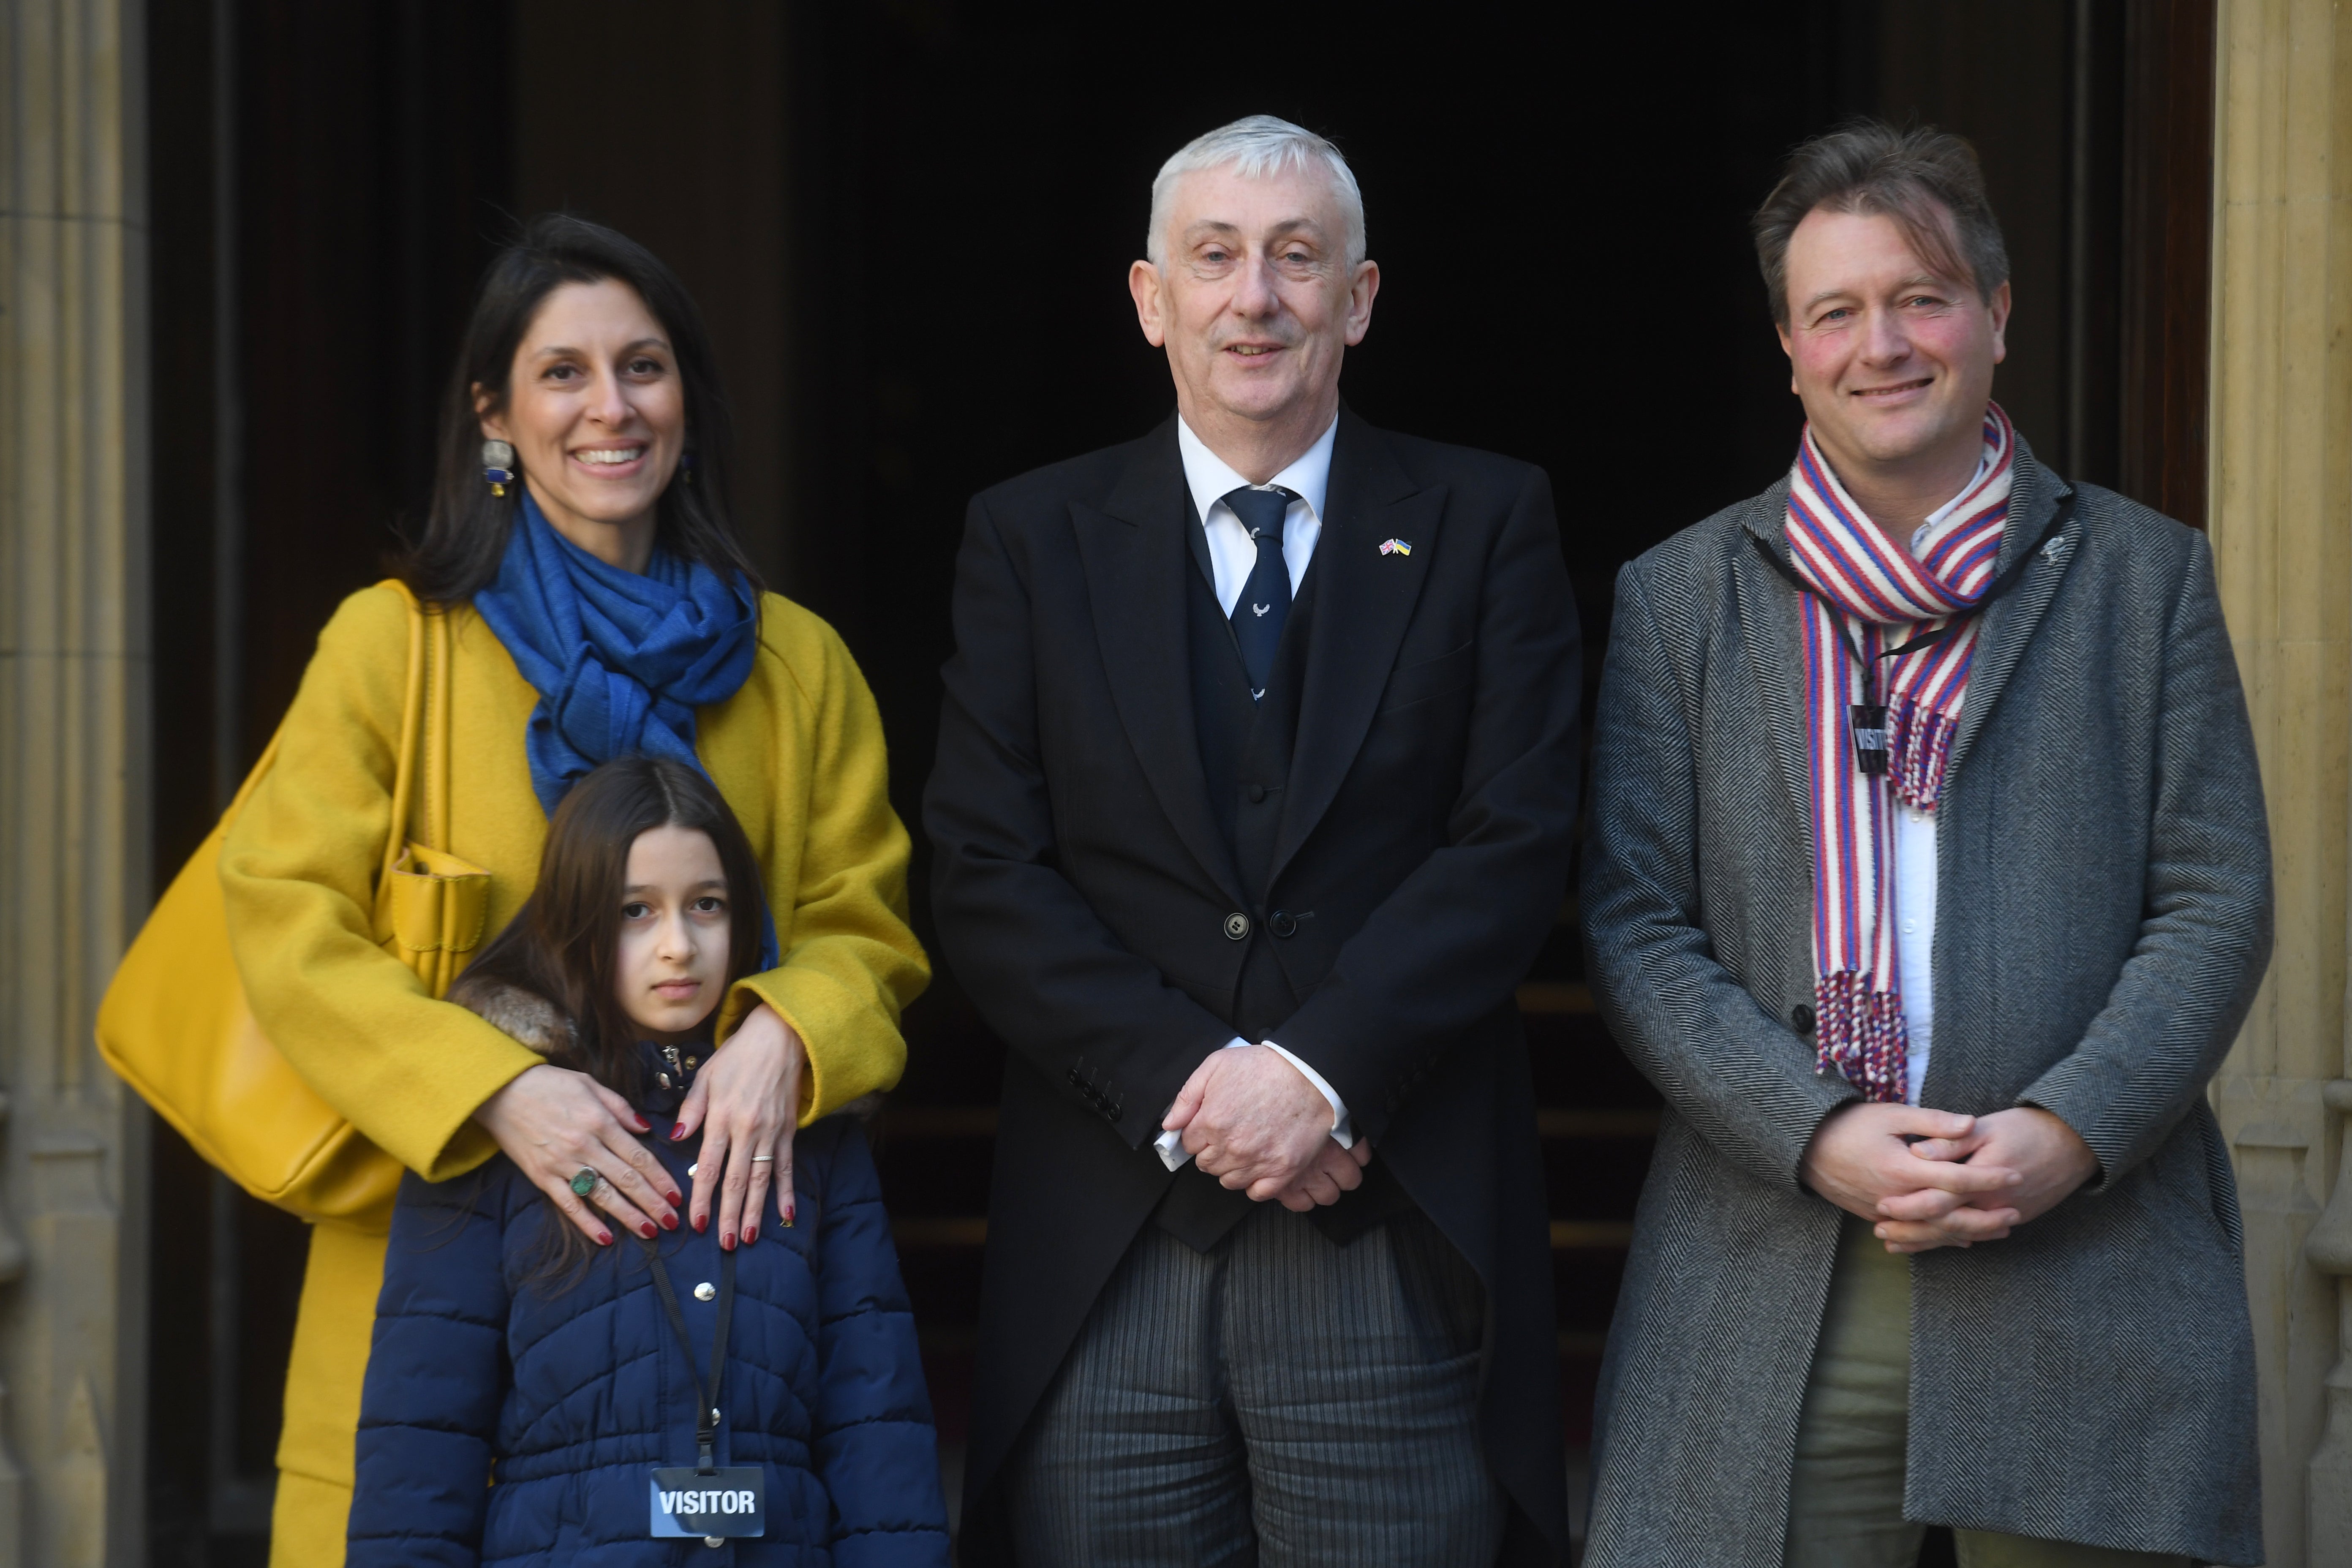 Nazanin Zaghari-Ratcliffe, Richard Ratcliffe and their daughter Gabriella with Commons Speaker Sir Lindsay Hoyle, centre, at the Palace of Westminster (UK Parliament/Jessica Taylor)